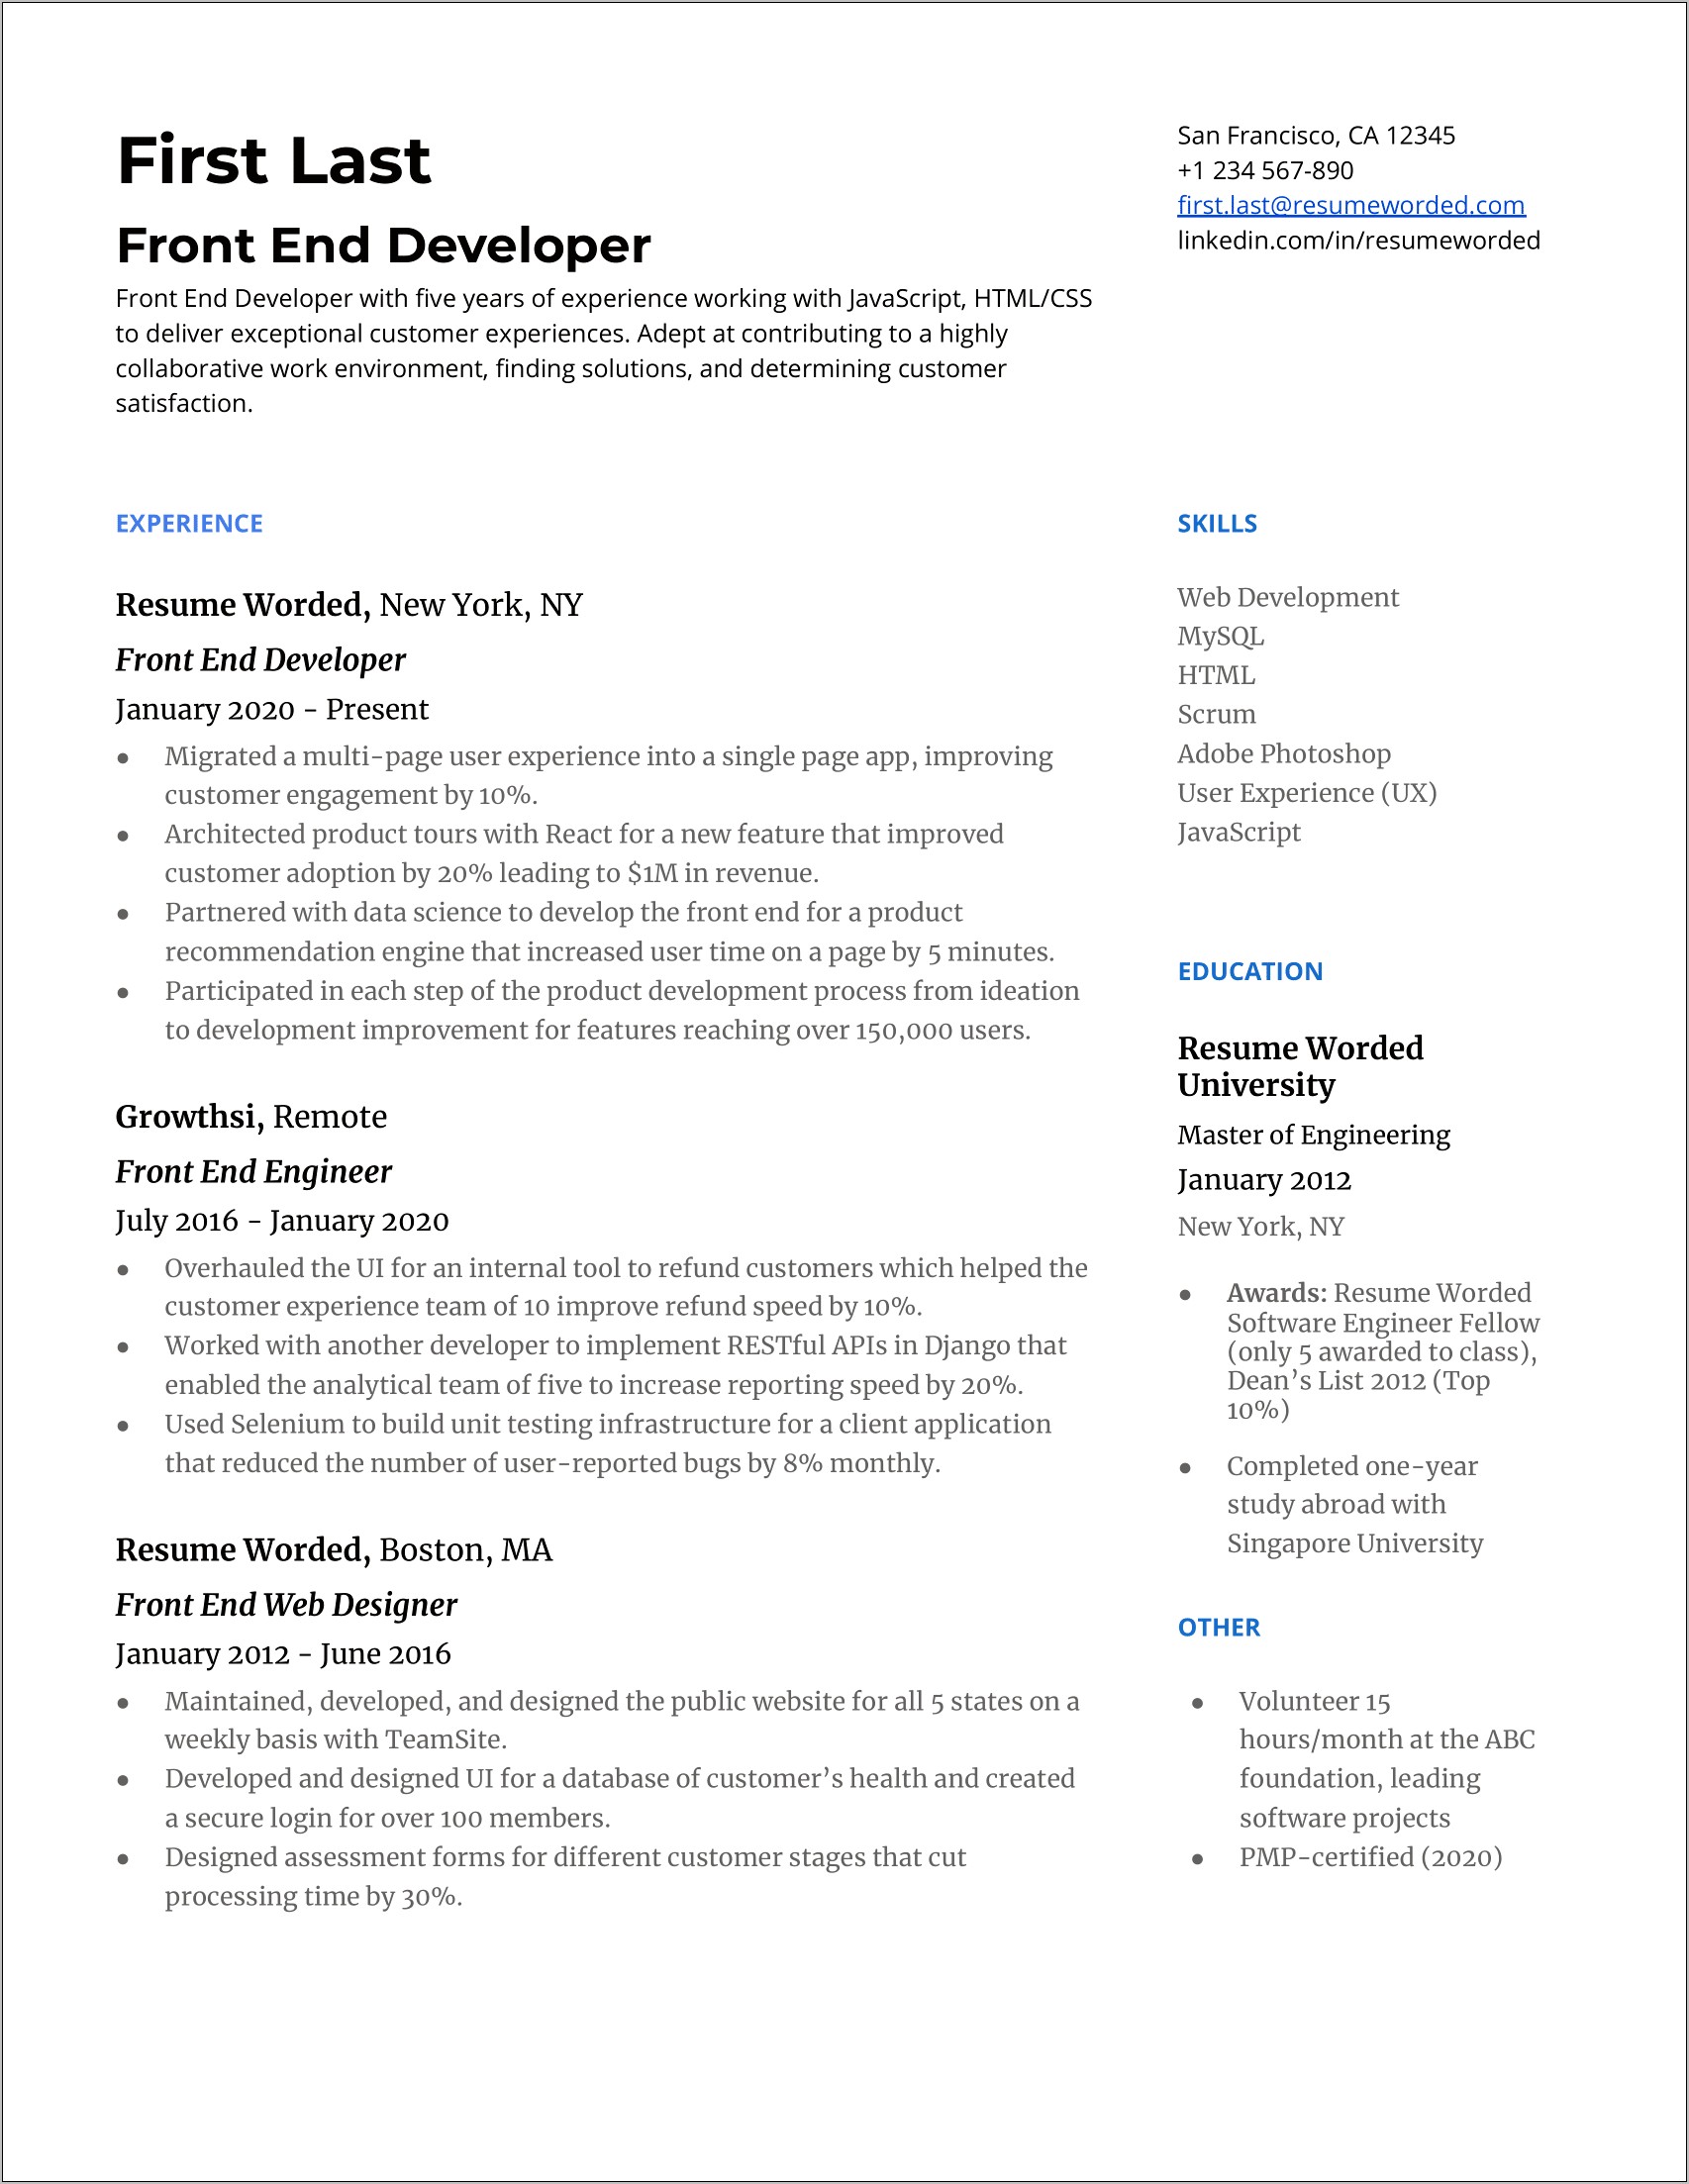 Resume Skill Experience Working With Developmental Disabilities